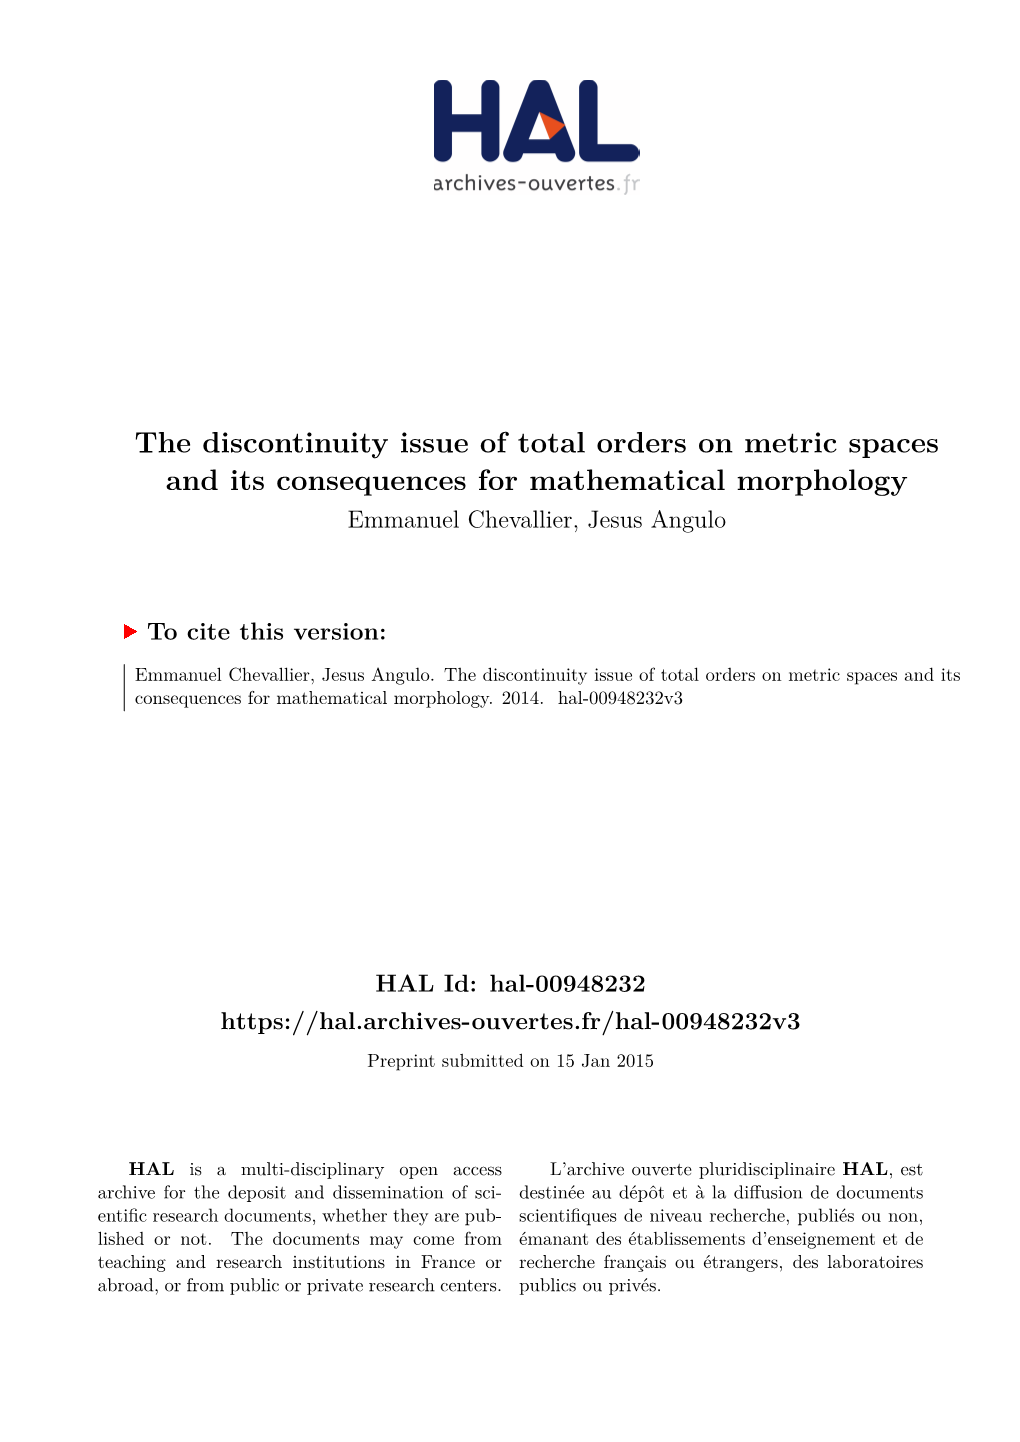 The Discontinuity Issue of Total Orders on Metric Spaces and Its Consequences for Mathematical Morphology Emmanuel Chevallier, Jesus Angulo